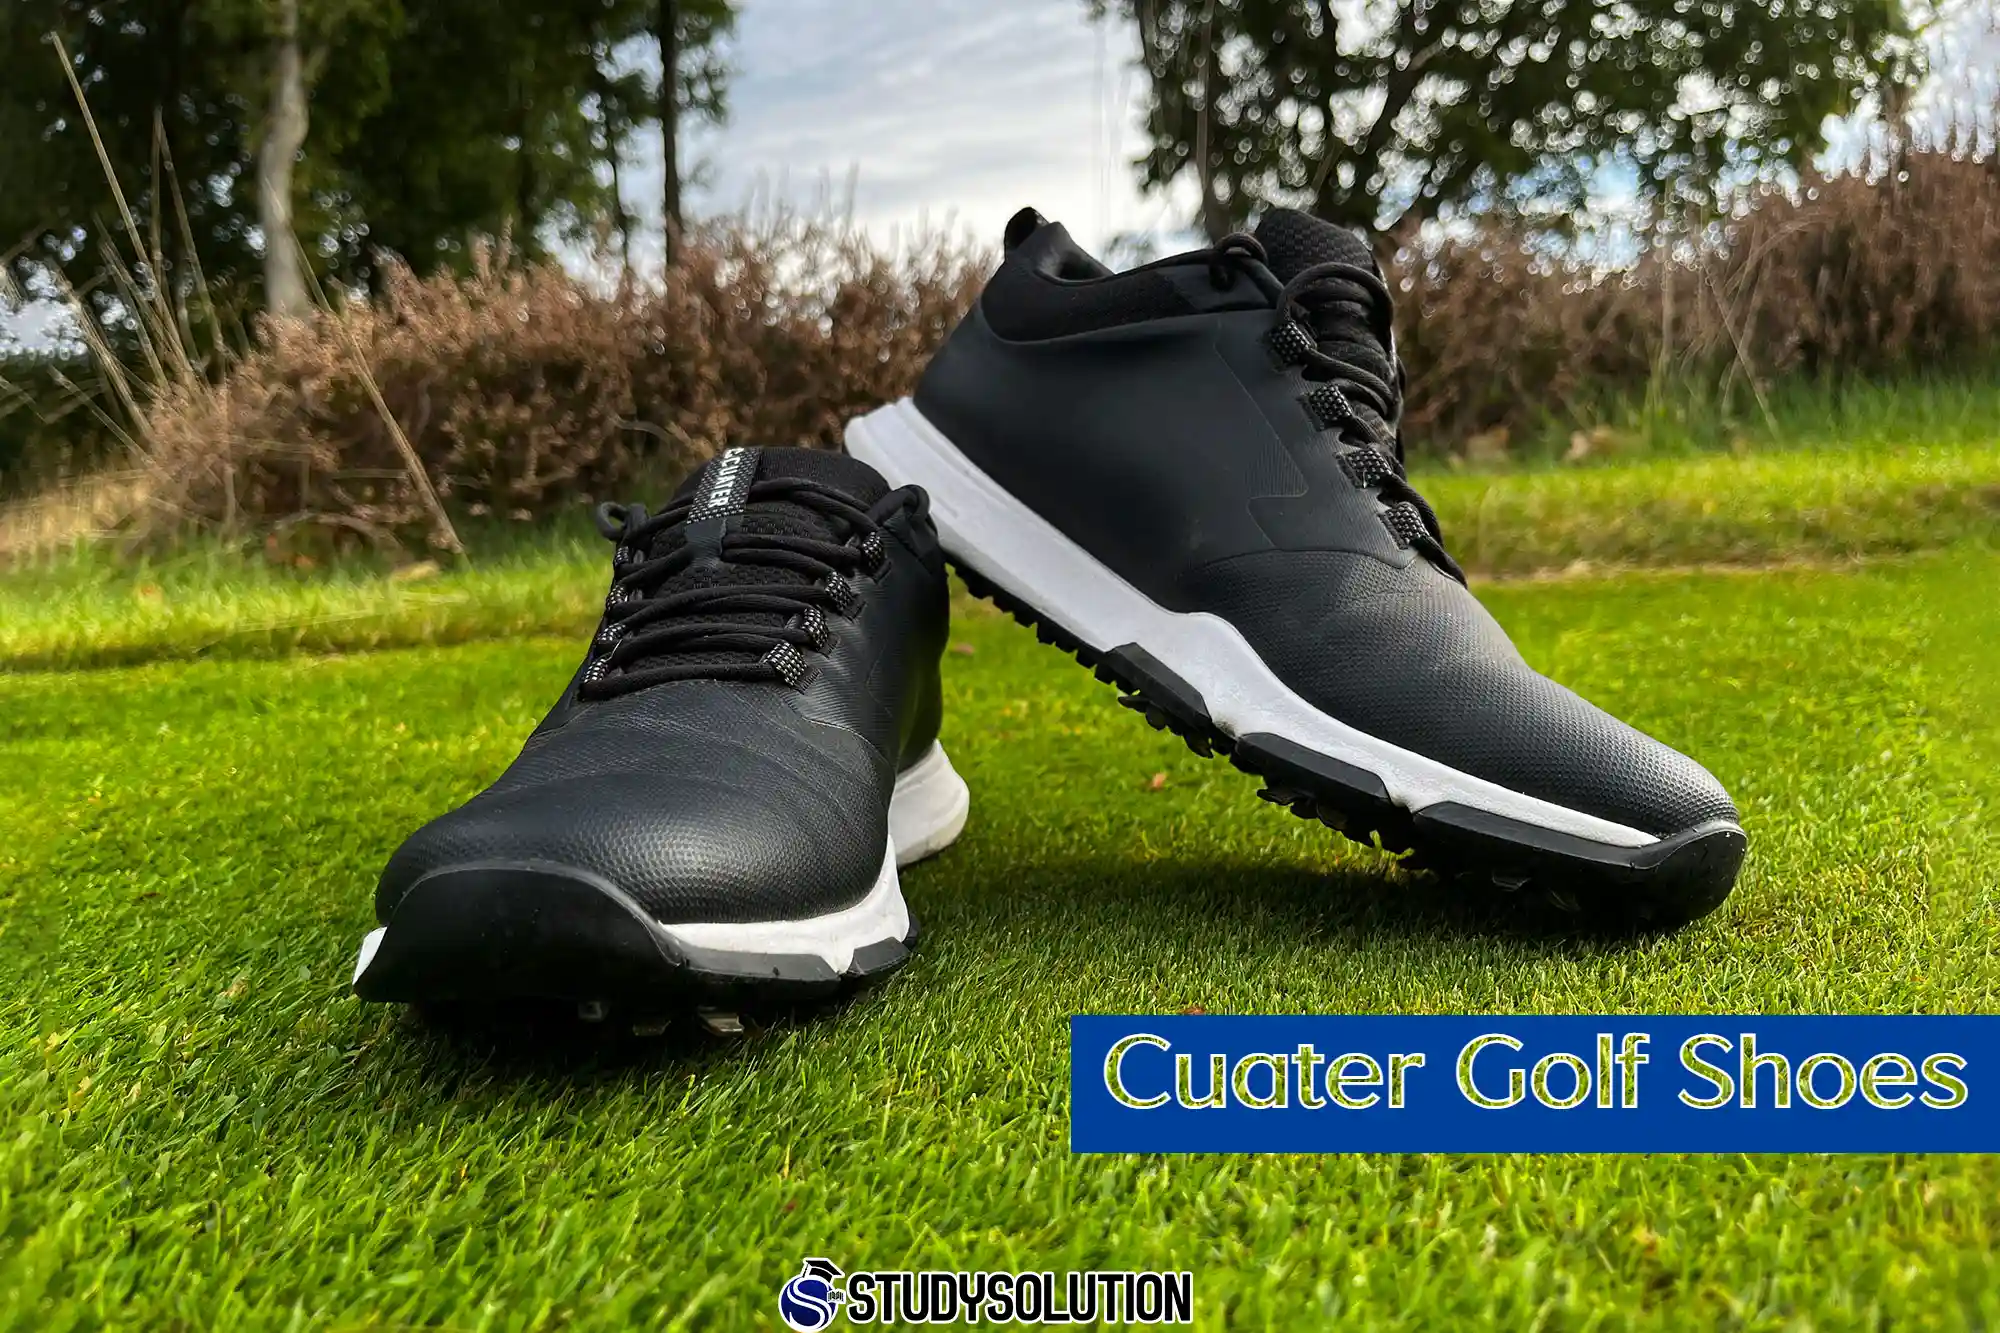 Cuater Golf Shoes review